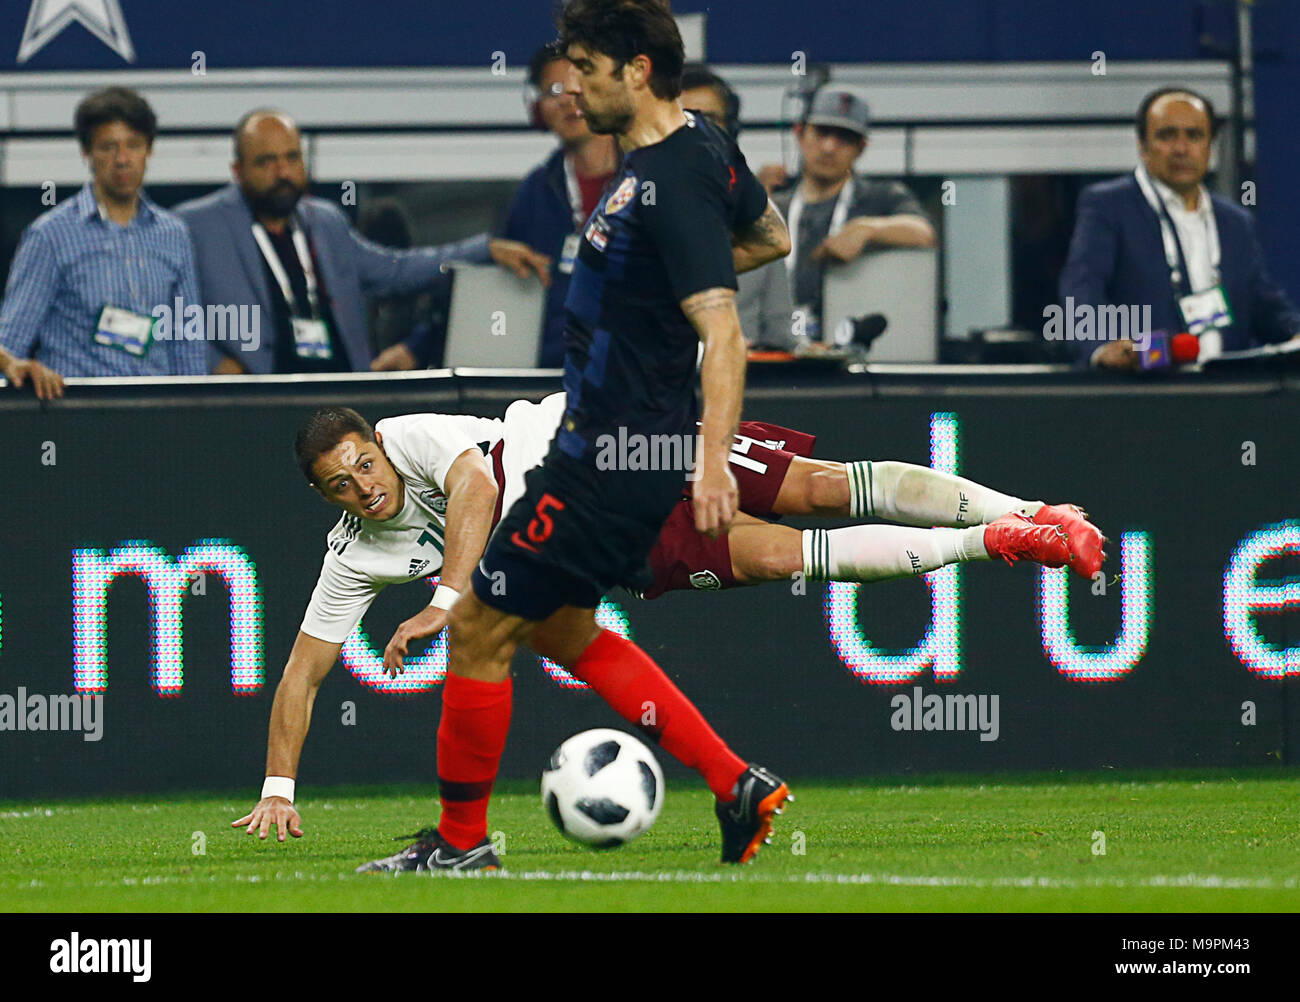 Arlington, Texas, USA. 27th Mar, 2018. March 27, 2018, Arlington Tx., USA. Javier Hernandez (14) of Mexico dives after a shot during the second half of the Mexico vs Croatia International Friendly match at ATT Stadium in Arlington, Texas. Croatia defeated Mexico 1 to 0. Credit: Ralph Lauer/ZUMA Wire/Alamy Live News Stock Photo